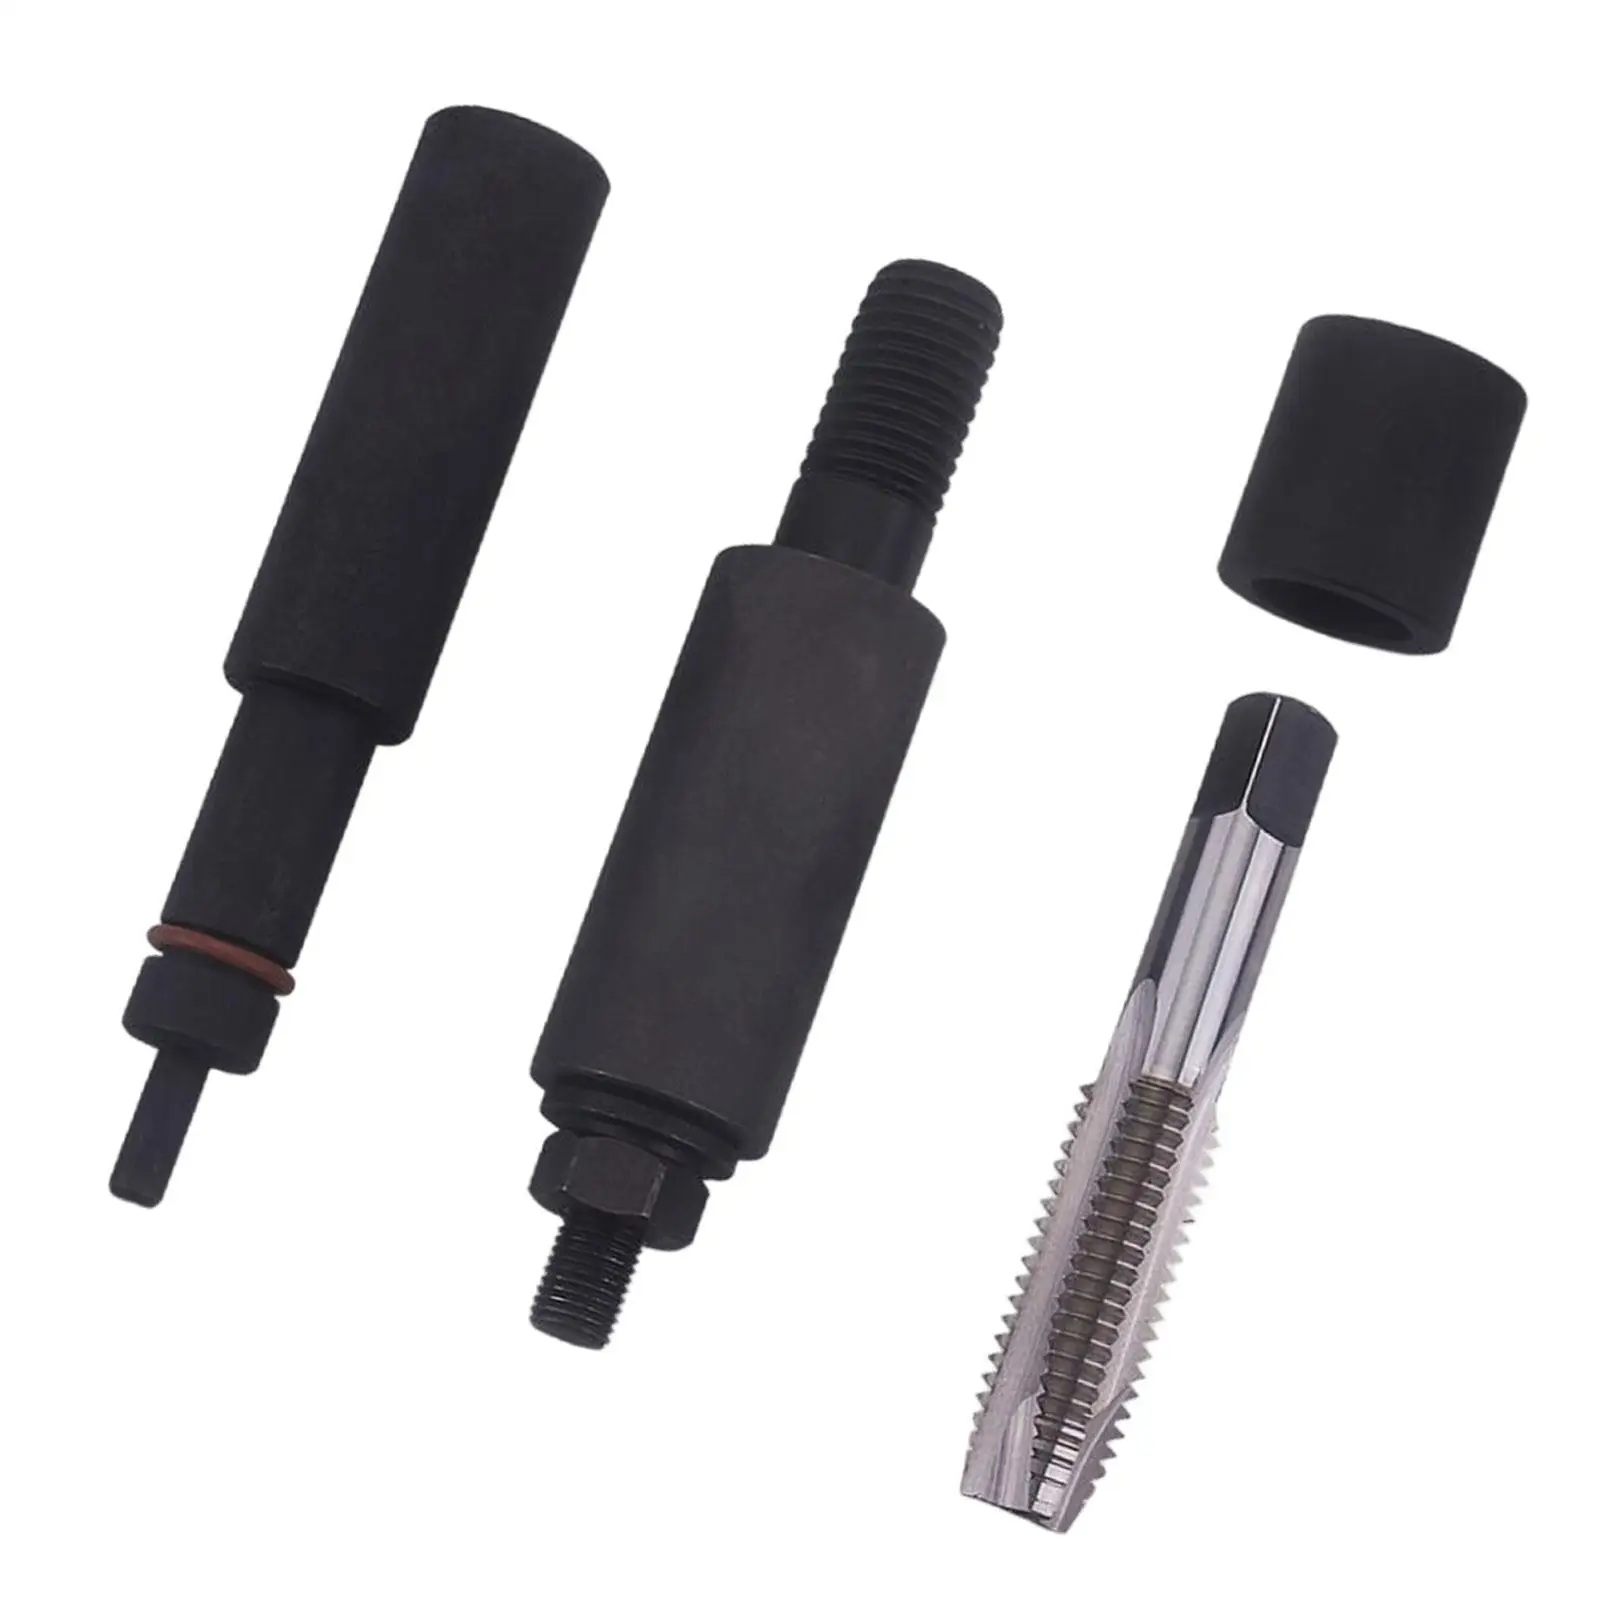 Fuel Injector Sleeve Cup Remove and Install Tool Set High Performance Automotive Repair Tool for Ford 6.0L 6.4L Powerstroke